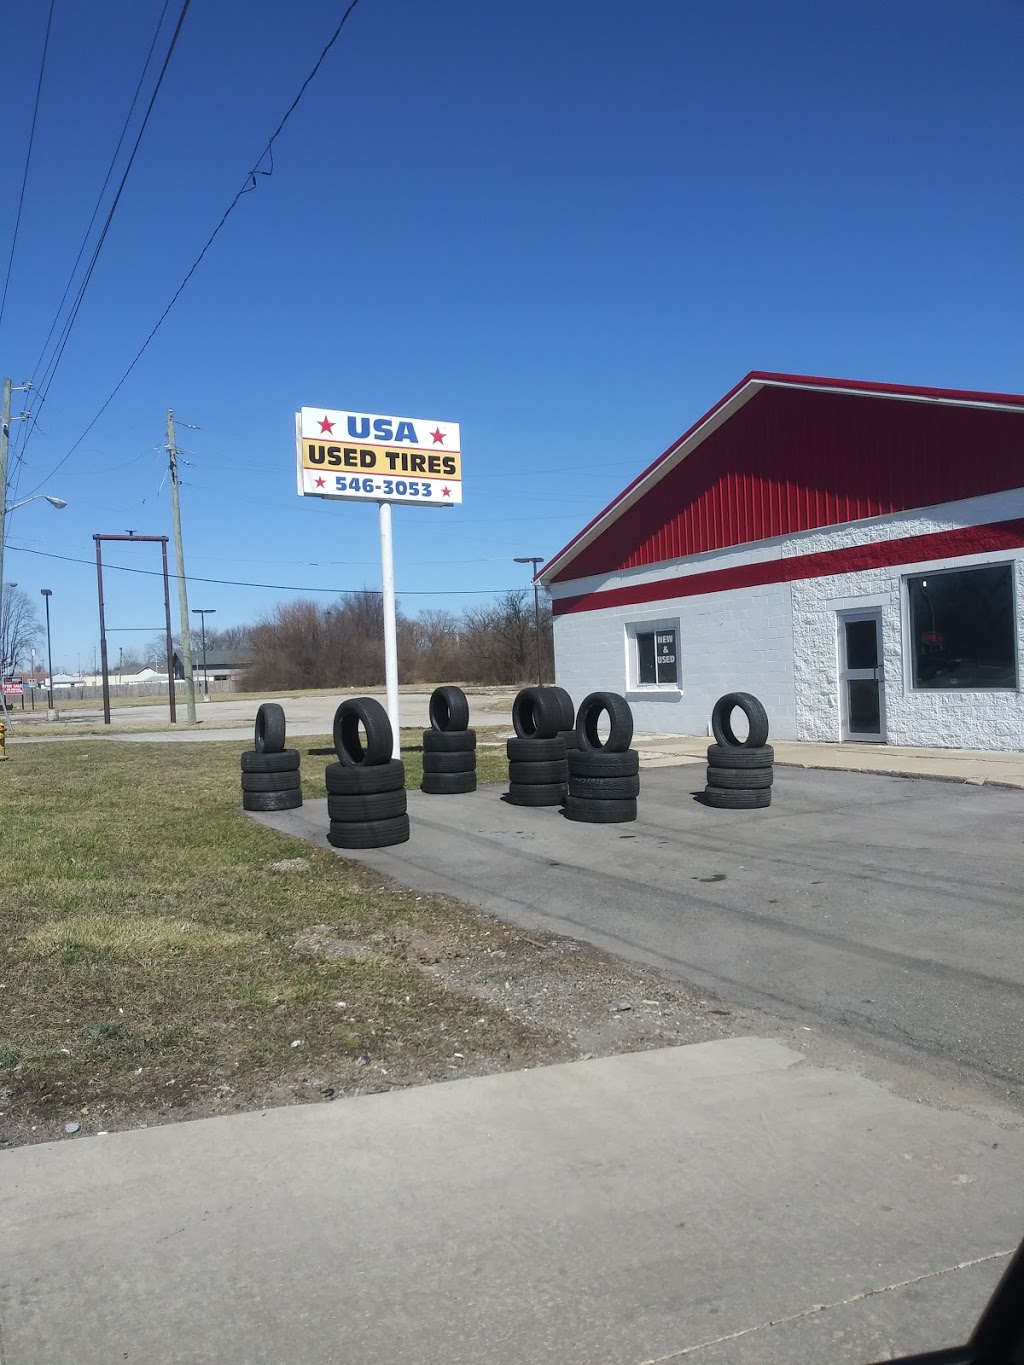 USA Good Used Tires | 4343 Shadeland Ave, Indianapolis, IN 46226, USA | Phone: (317) 546-3053